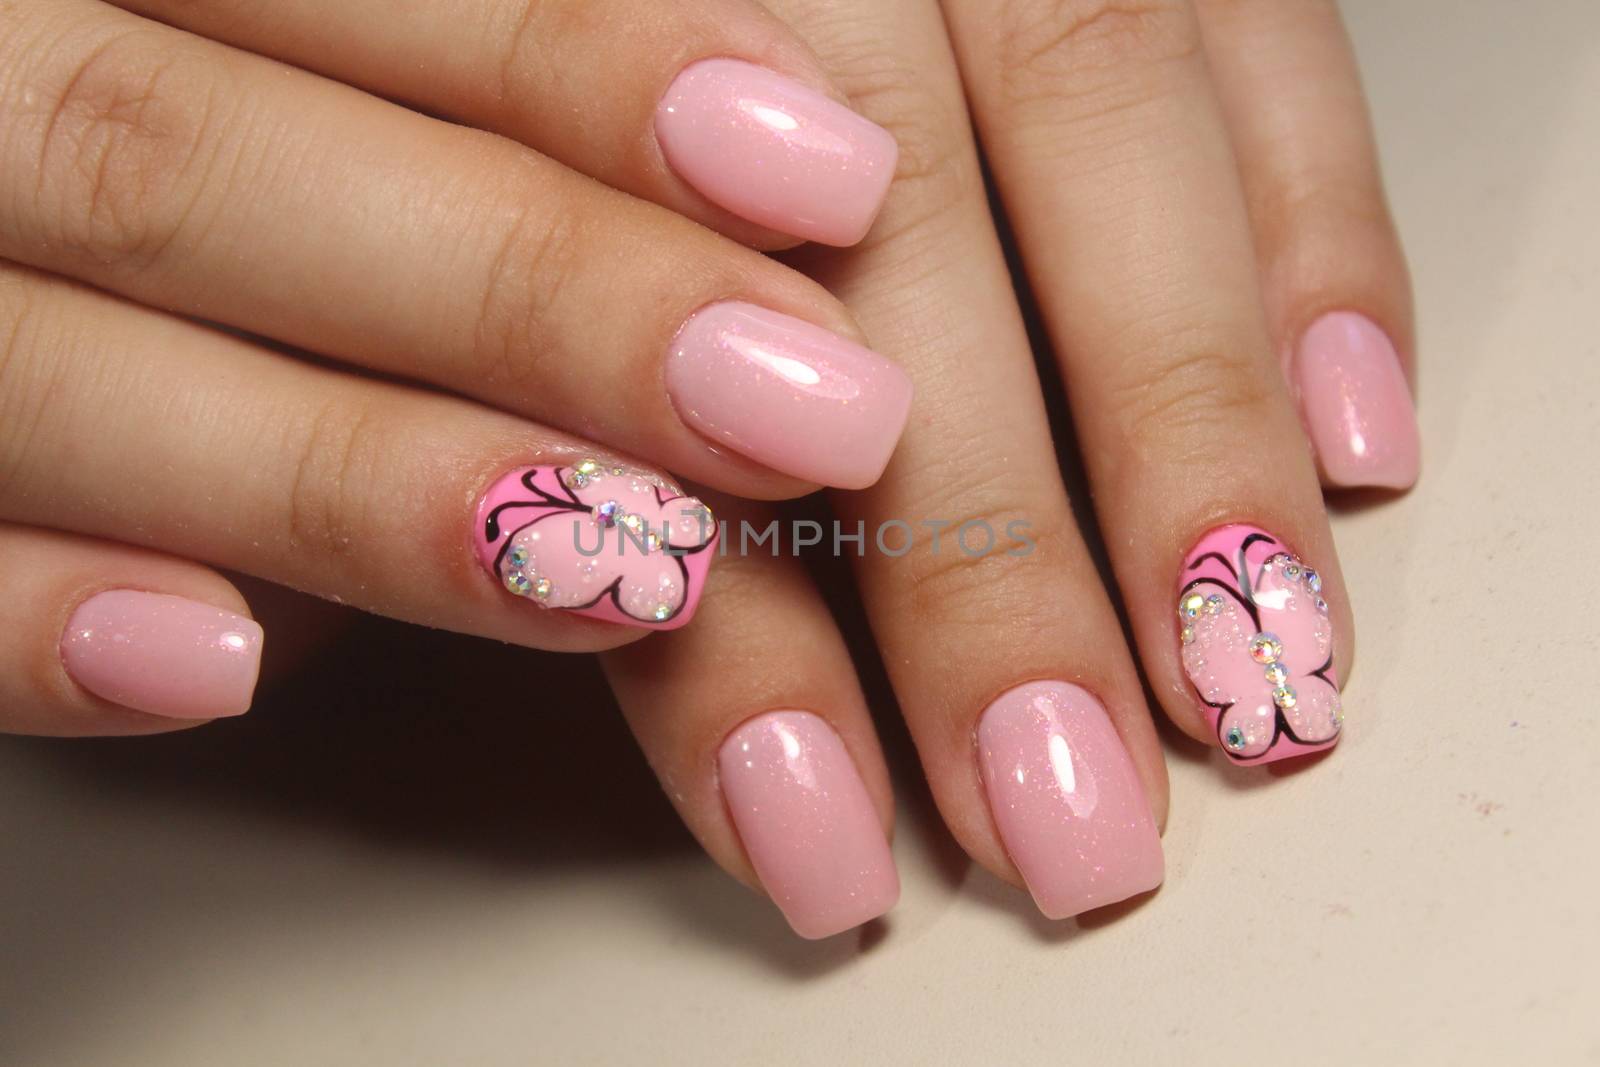 Manicure nail design with a butterfly pattern by SmirMaxStock